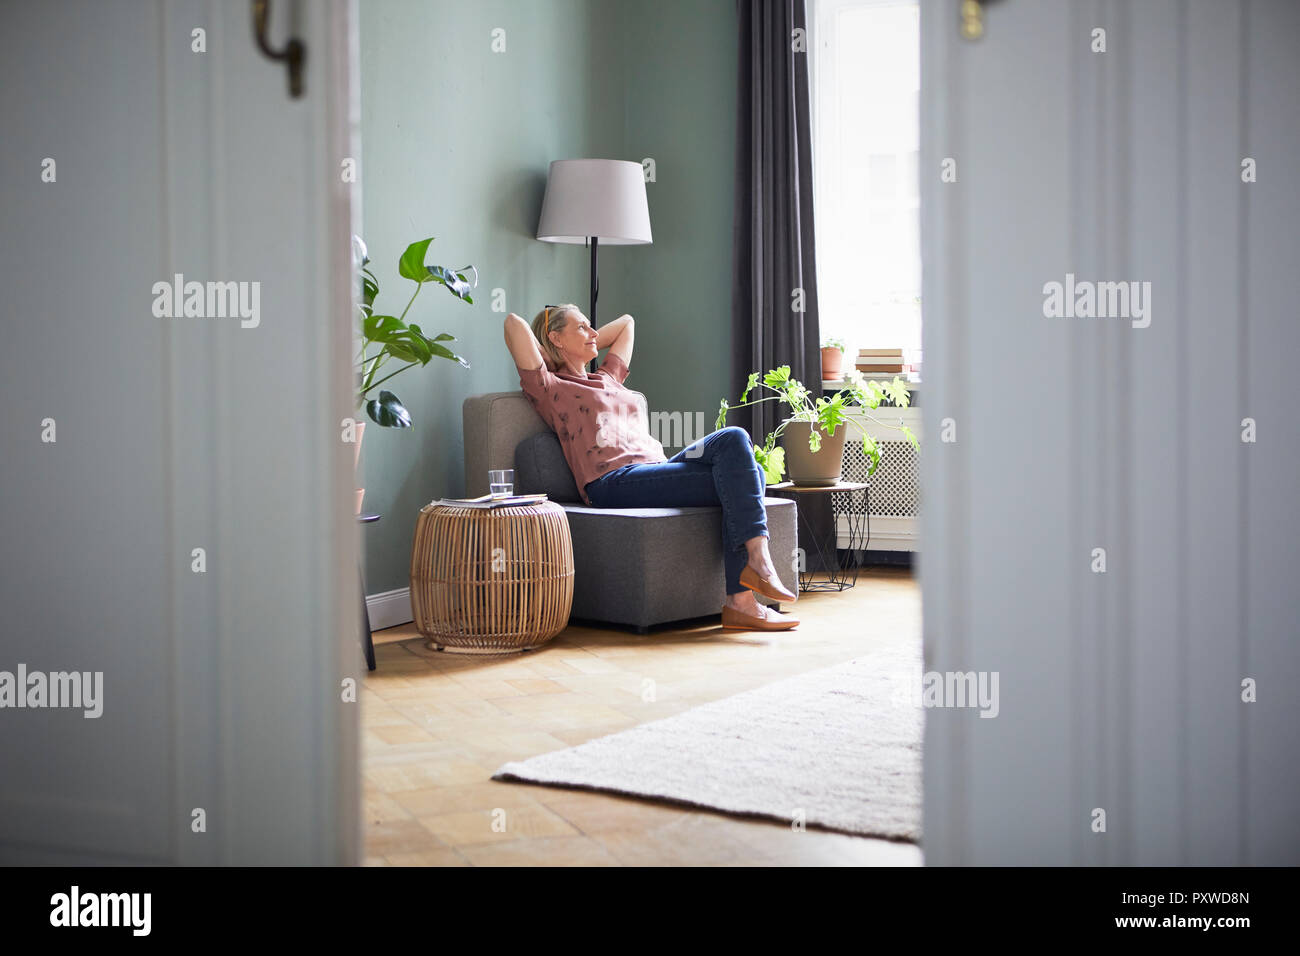 Relaxed mature woman sitting at home Banque D'Images